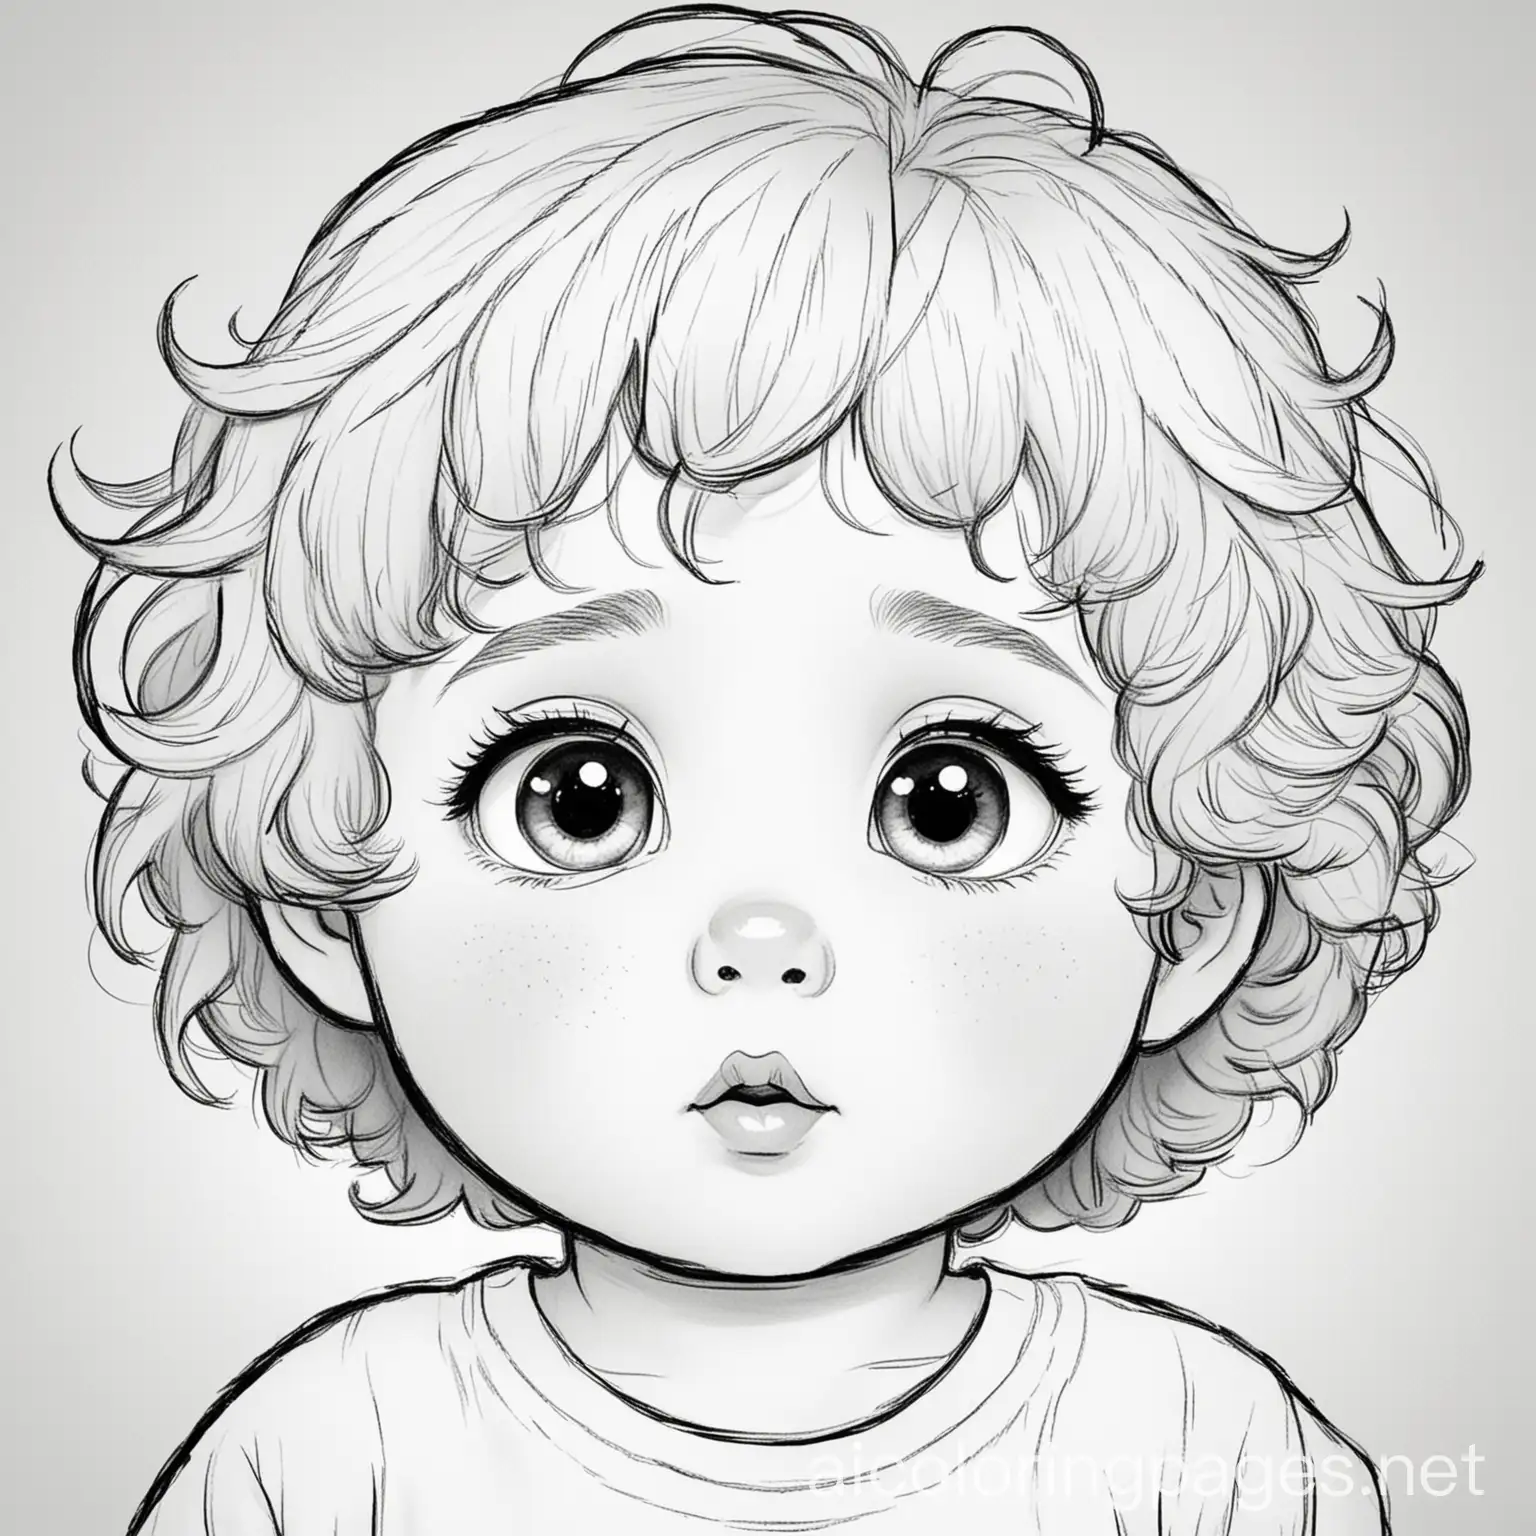 Adorable-Baby-Boy-Coloring-Page-Wavy-Haired-Infant-with-Big-Eyes-and-Chubby-Face